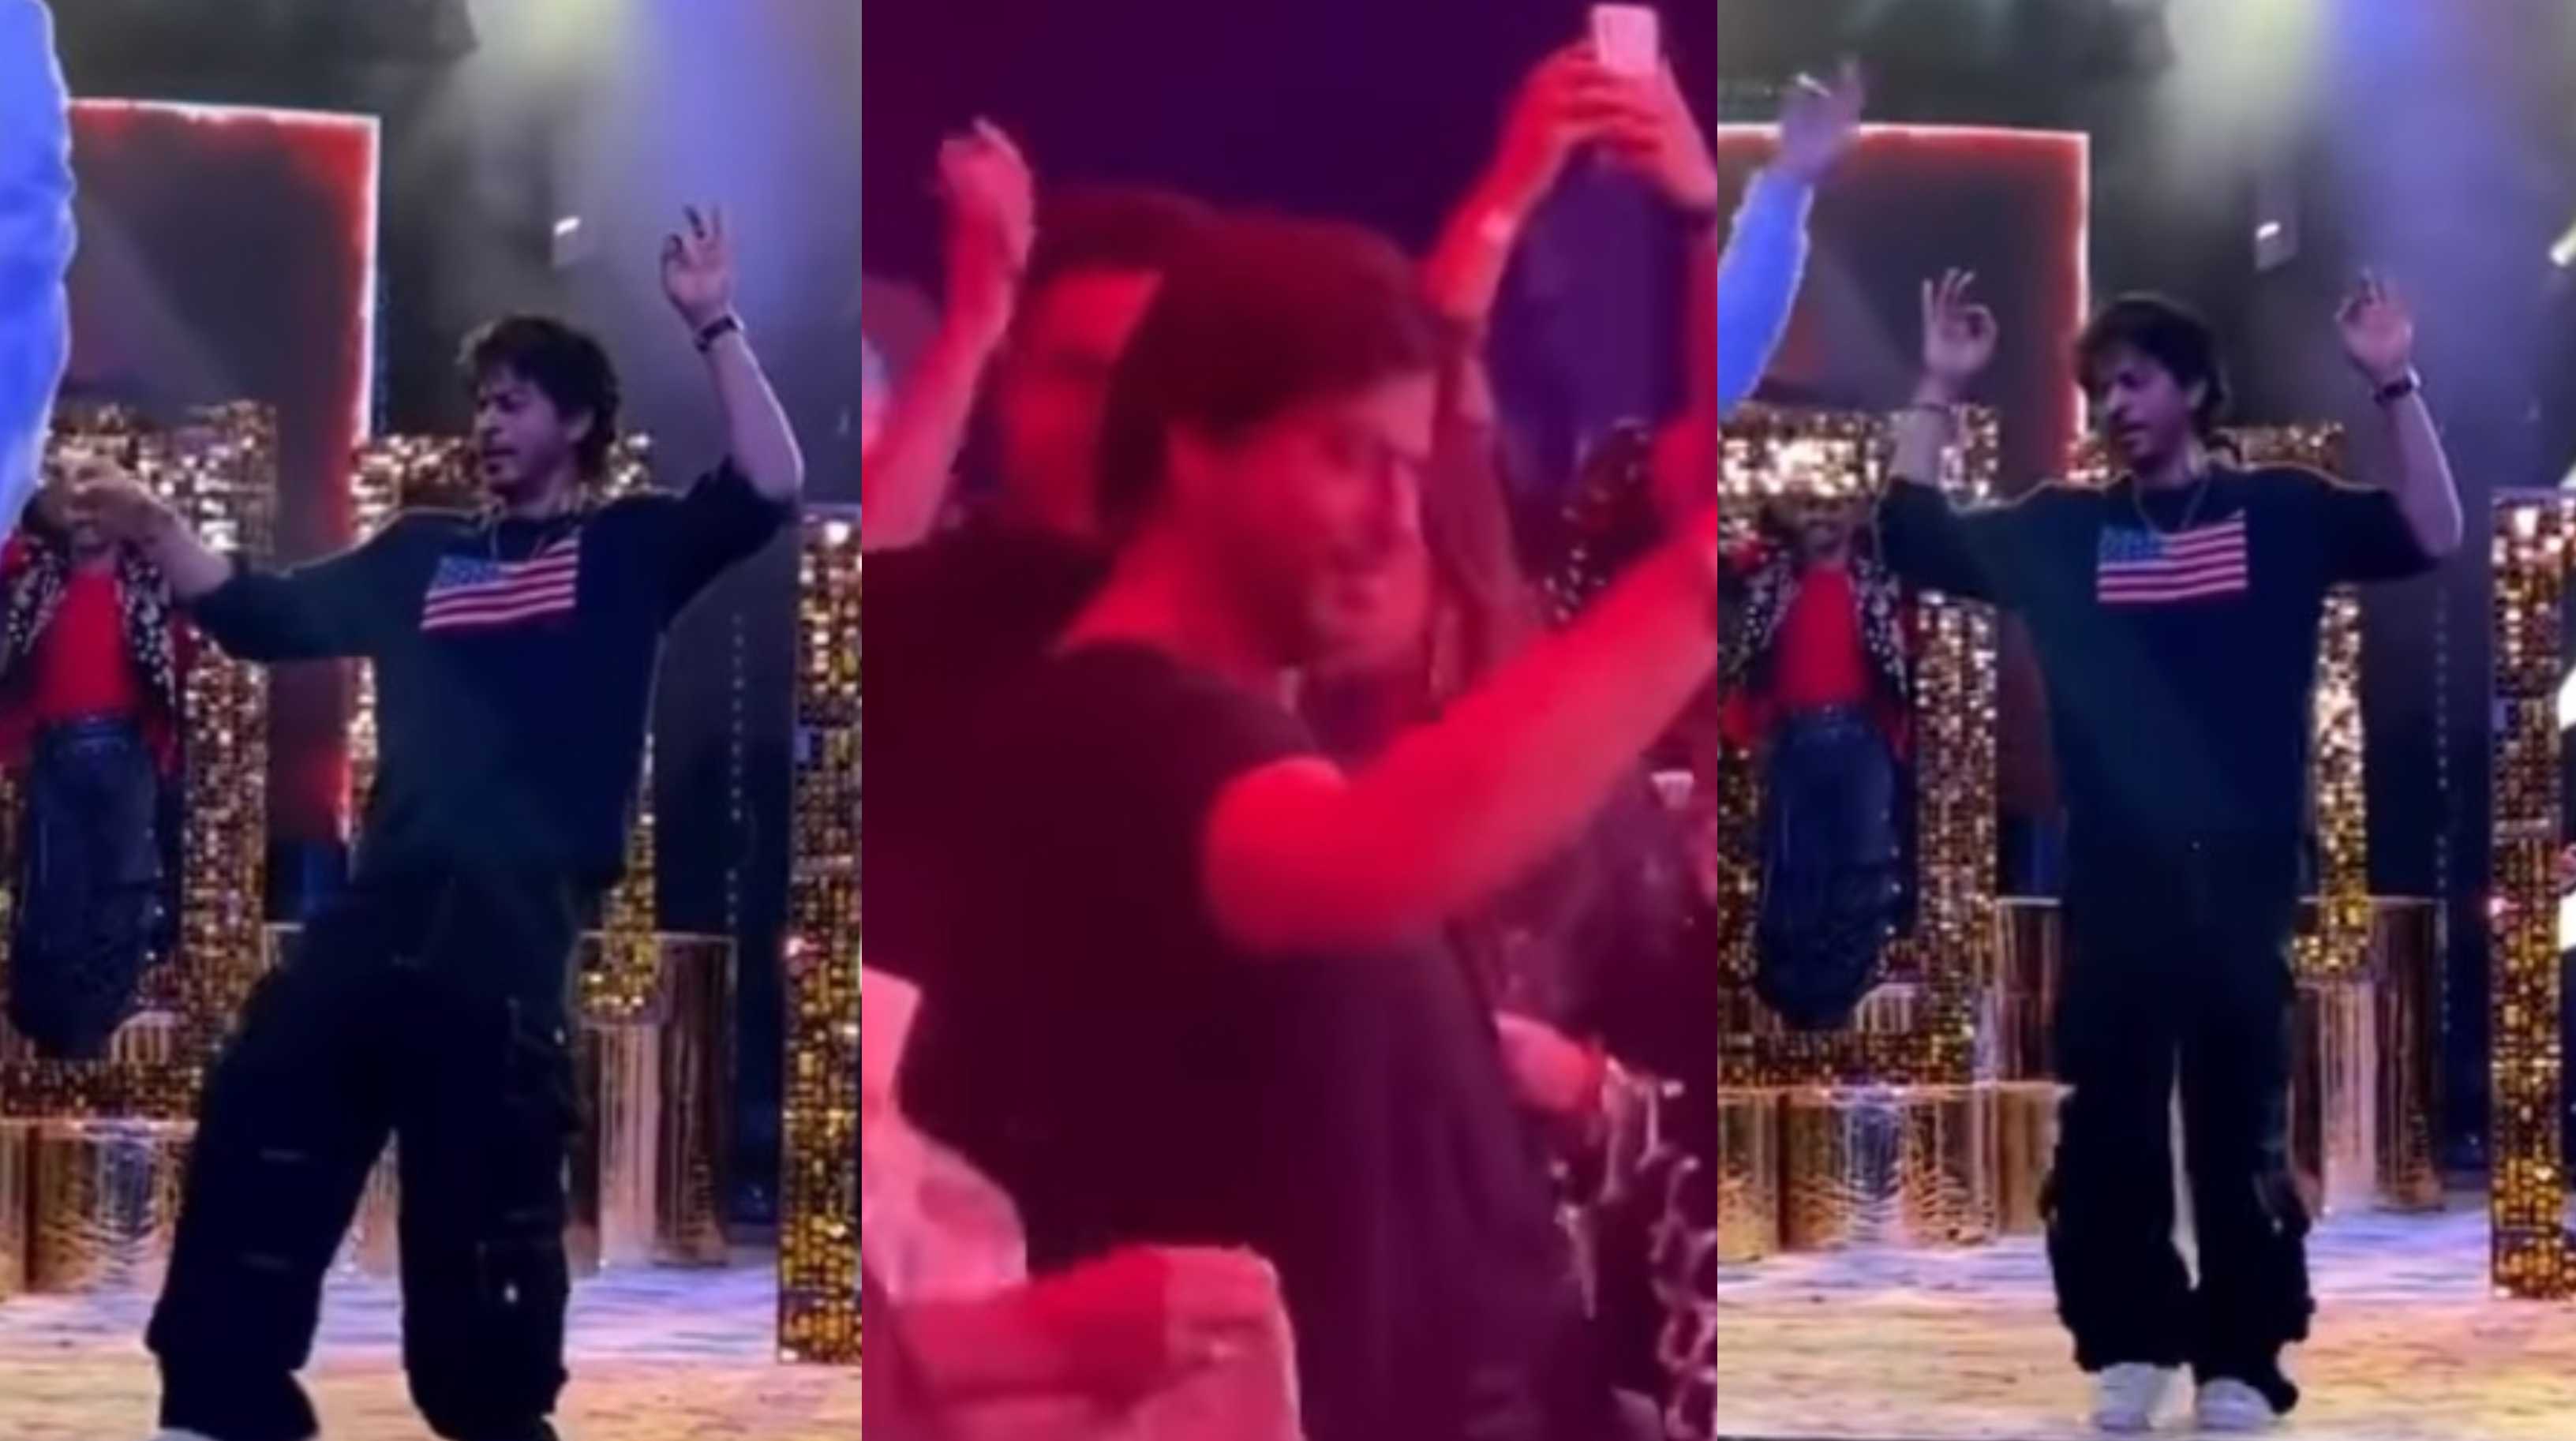 Shah Rukh Khan’s unseen videos grooving with Gauri & Shiamak Davar at NMACC will leave you wanting more; watch